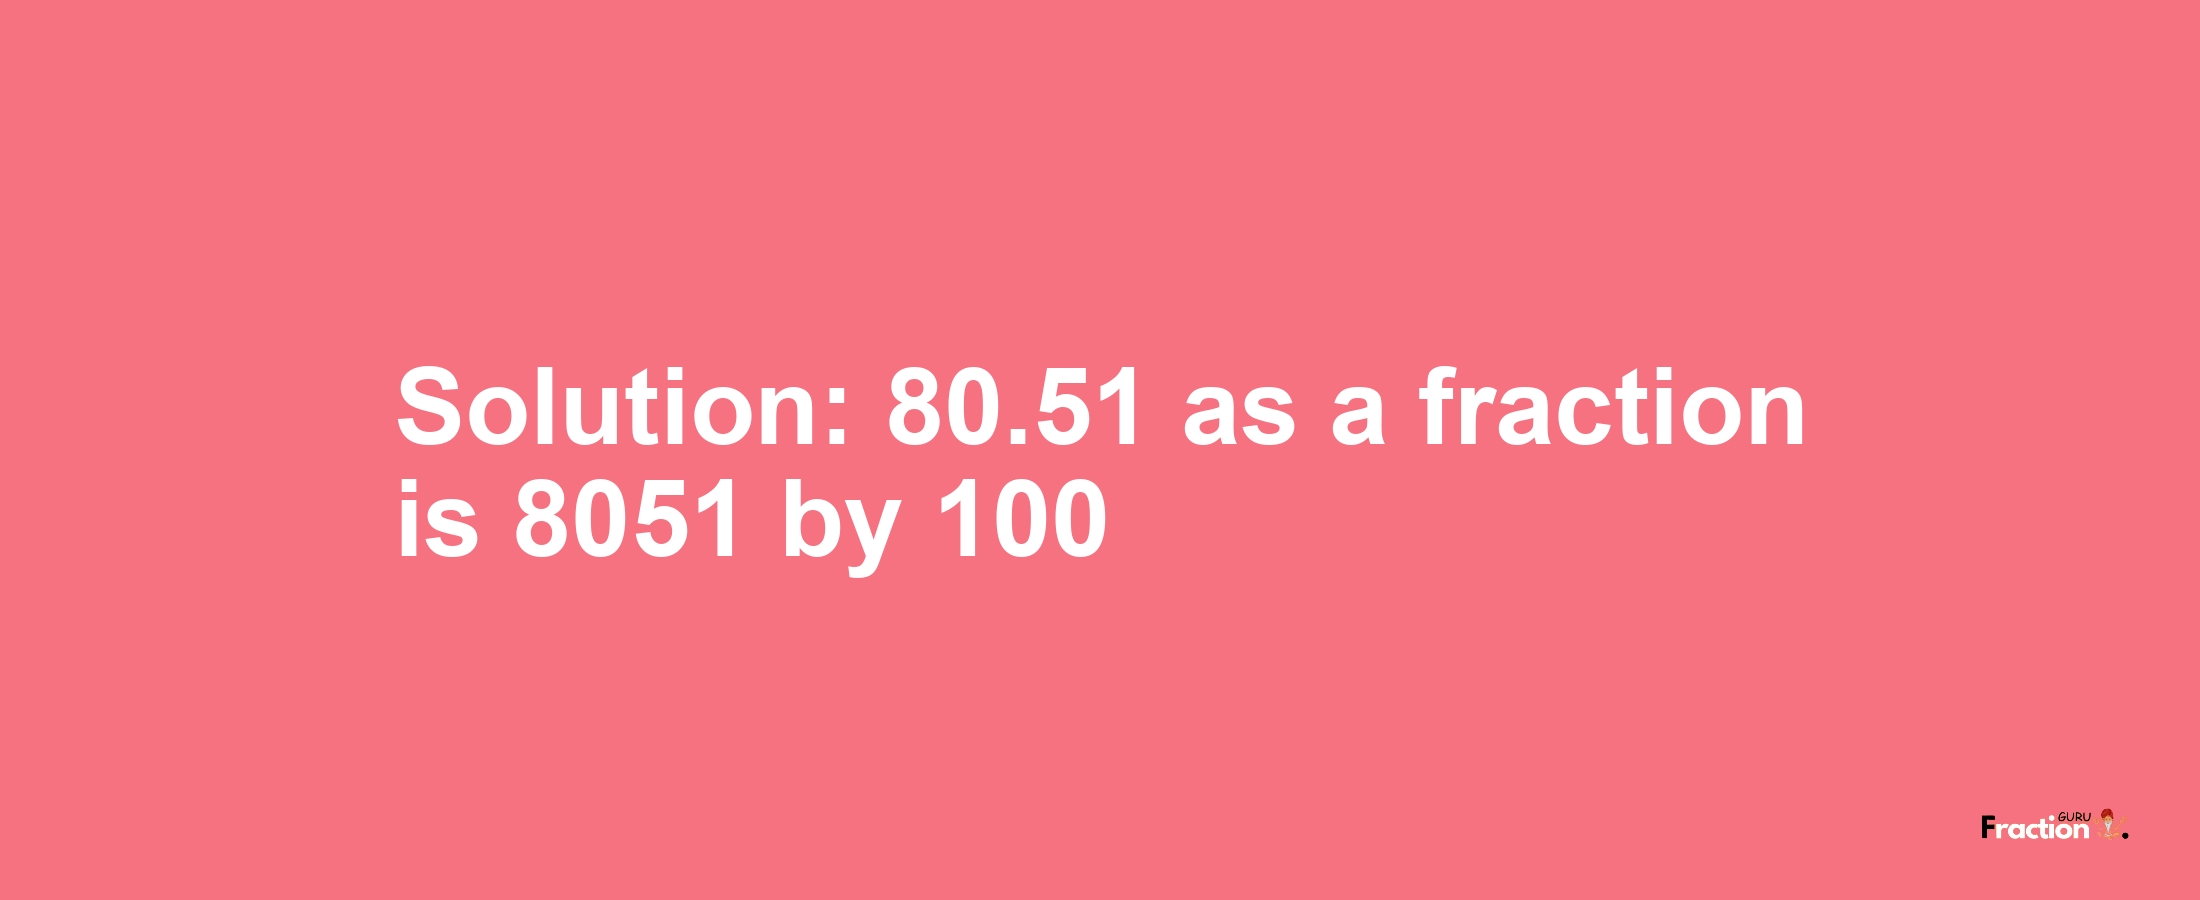 Solution:80.51 as a fraction is 8051/100